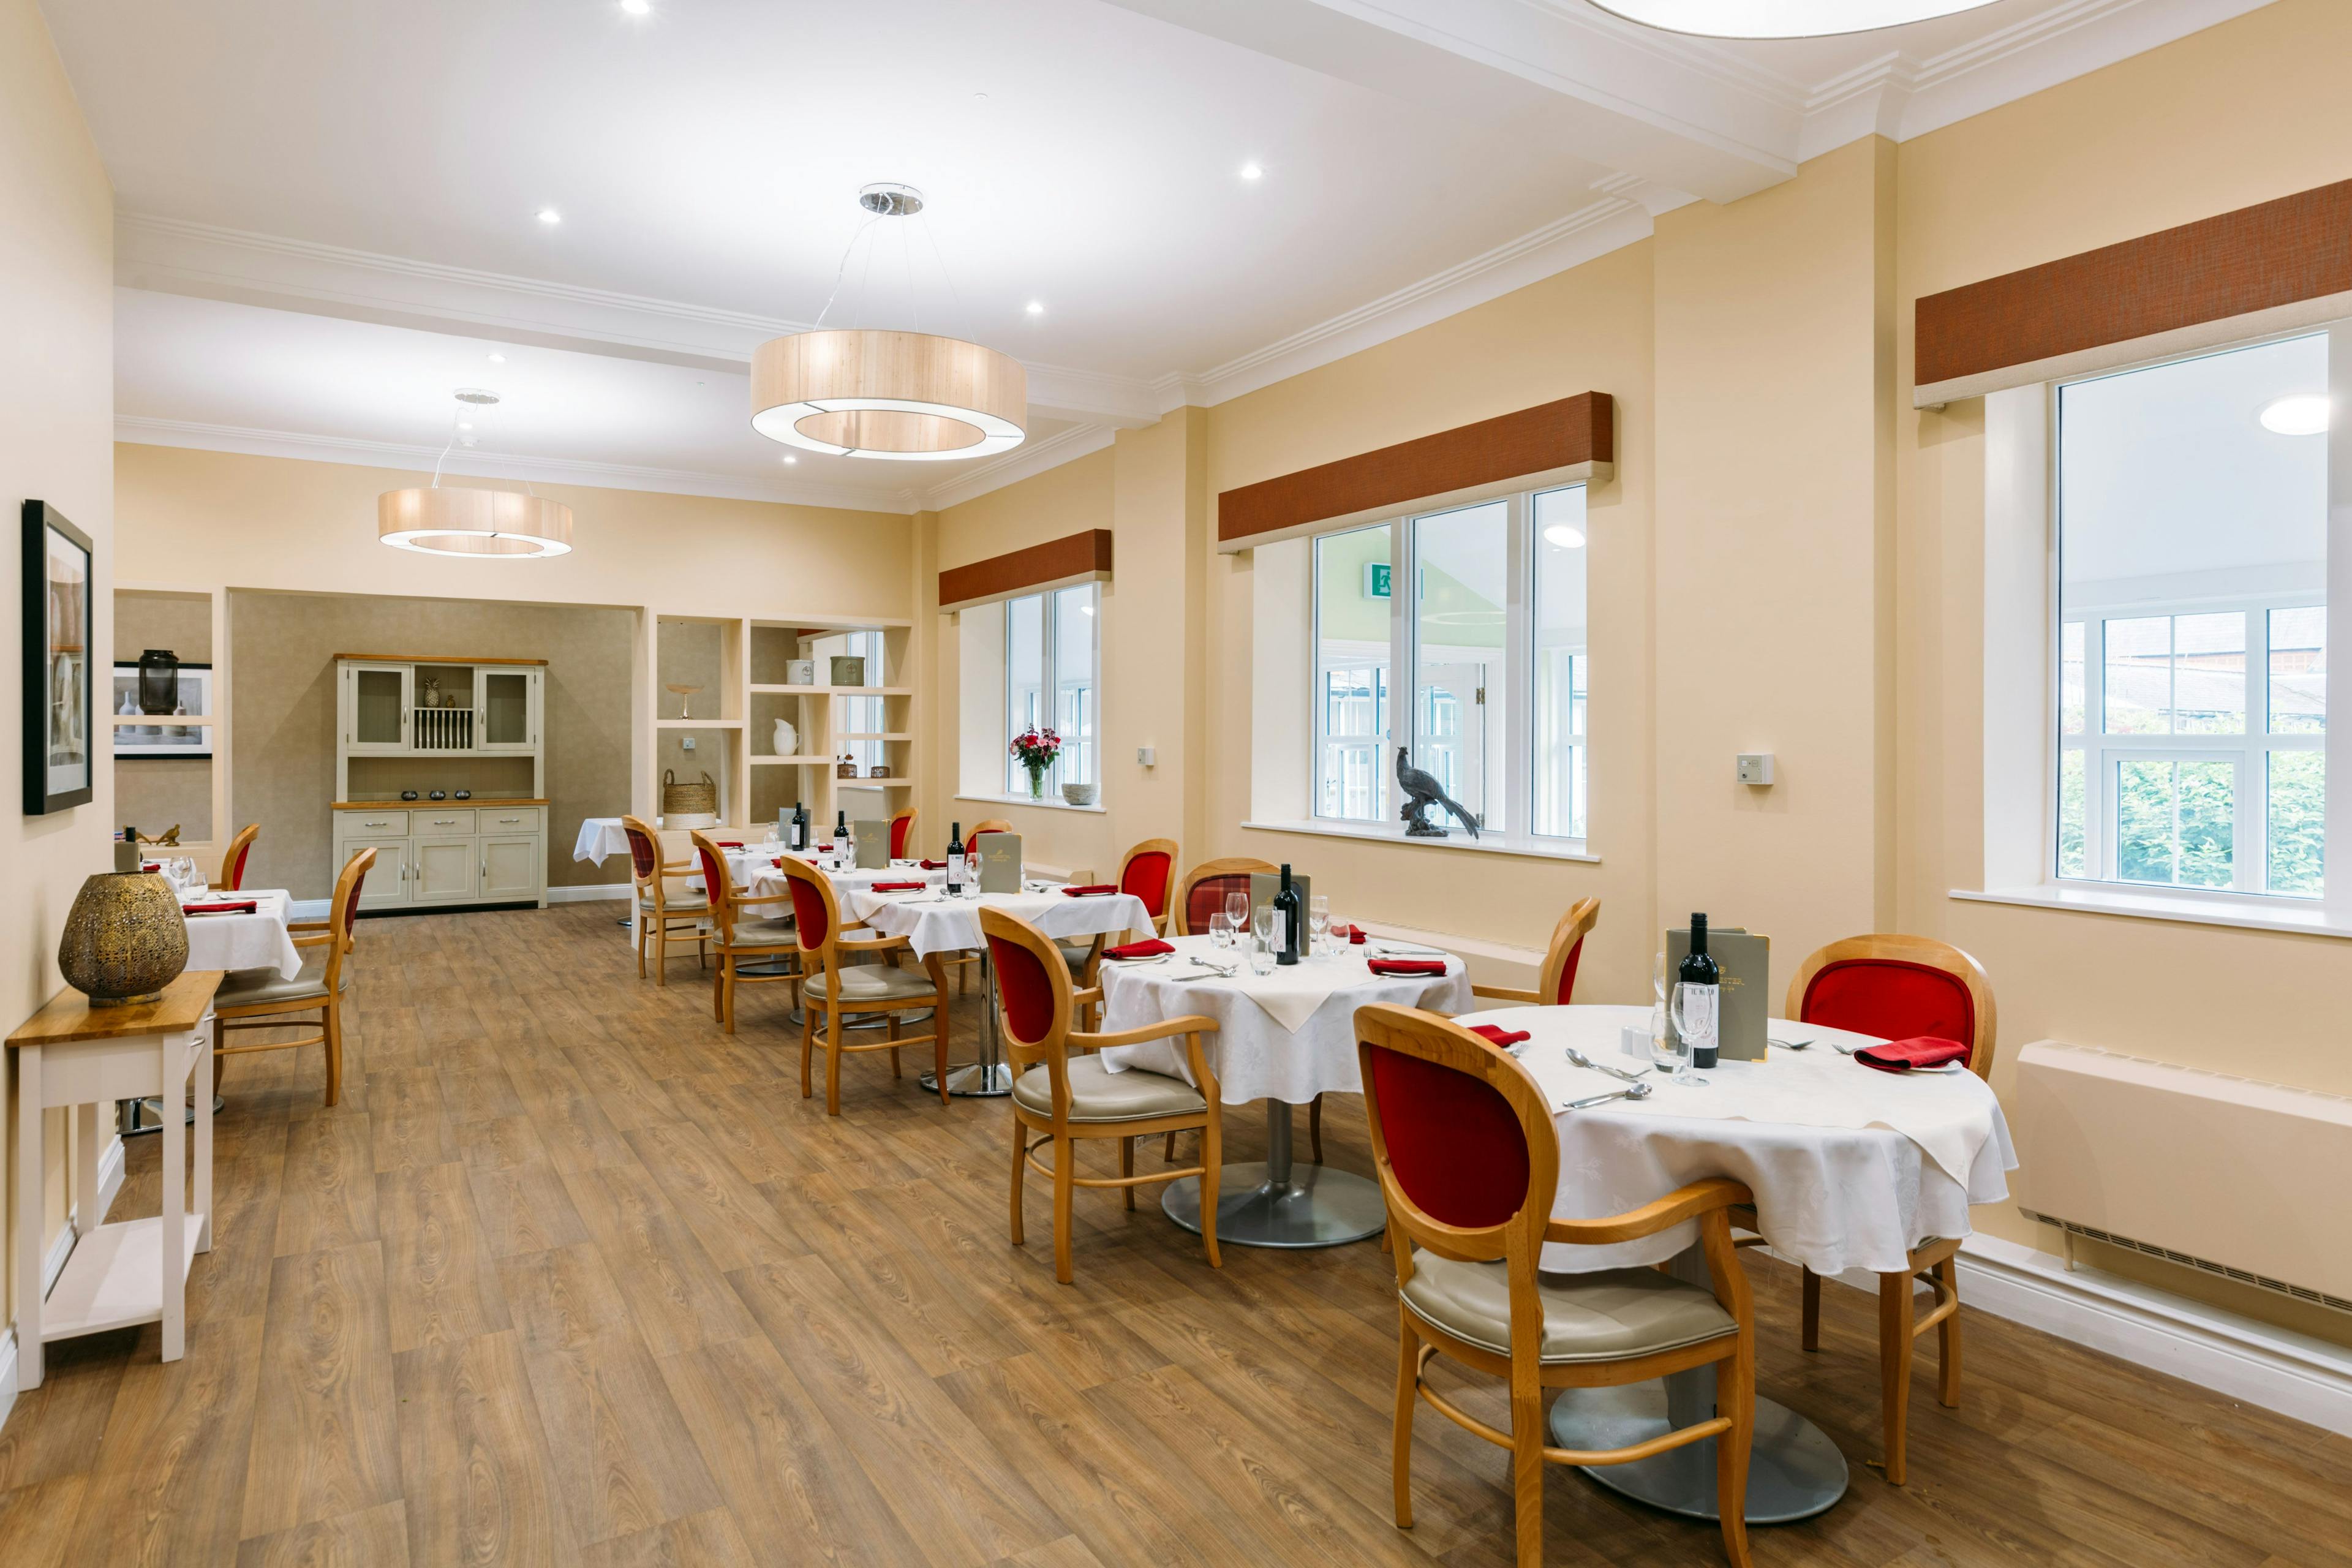 Dining Room at St Thomas Care Home in Basingstoke, Hampshire